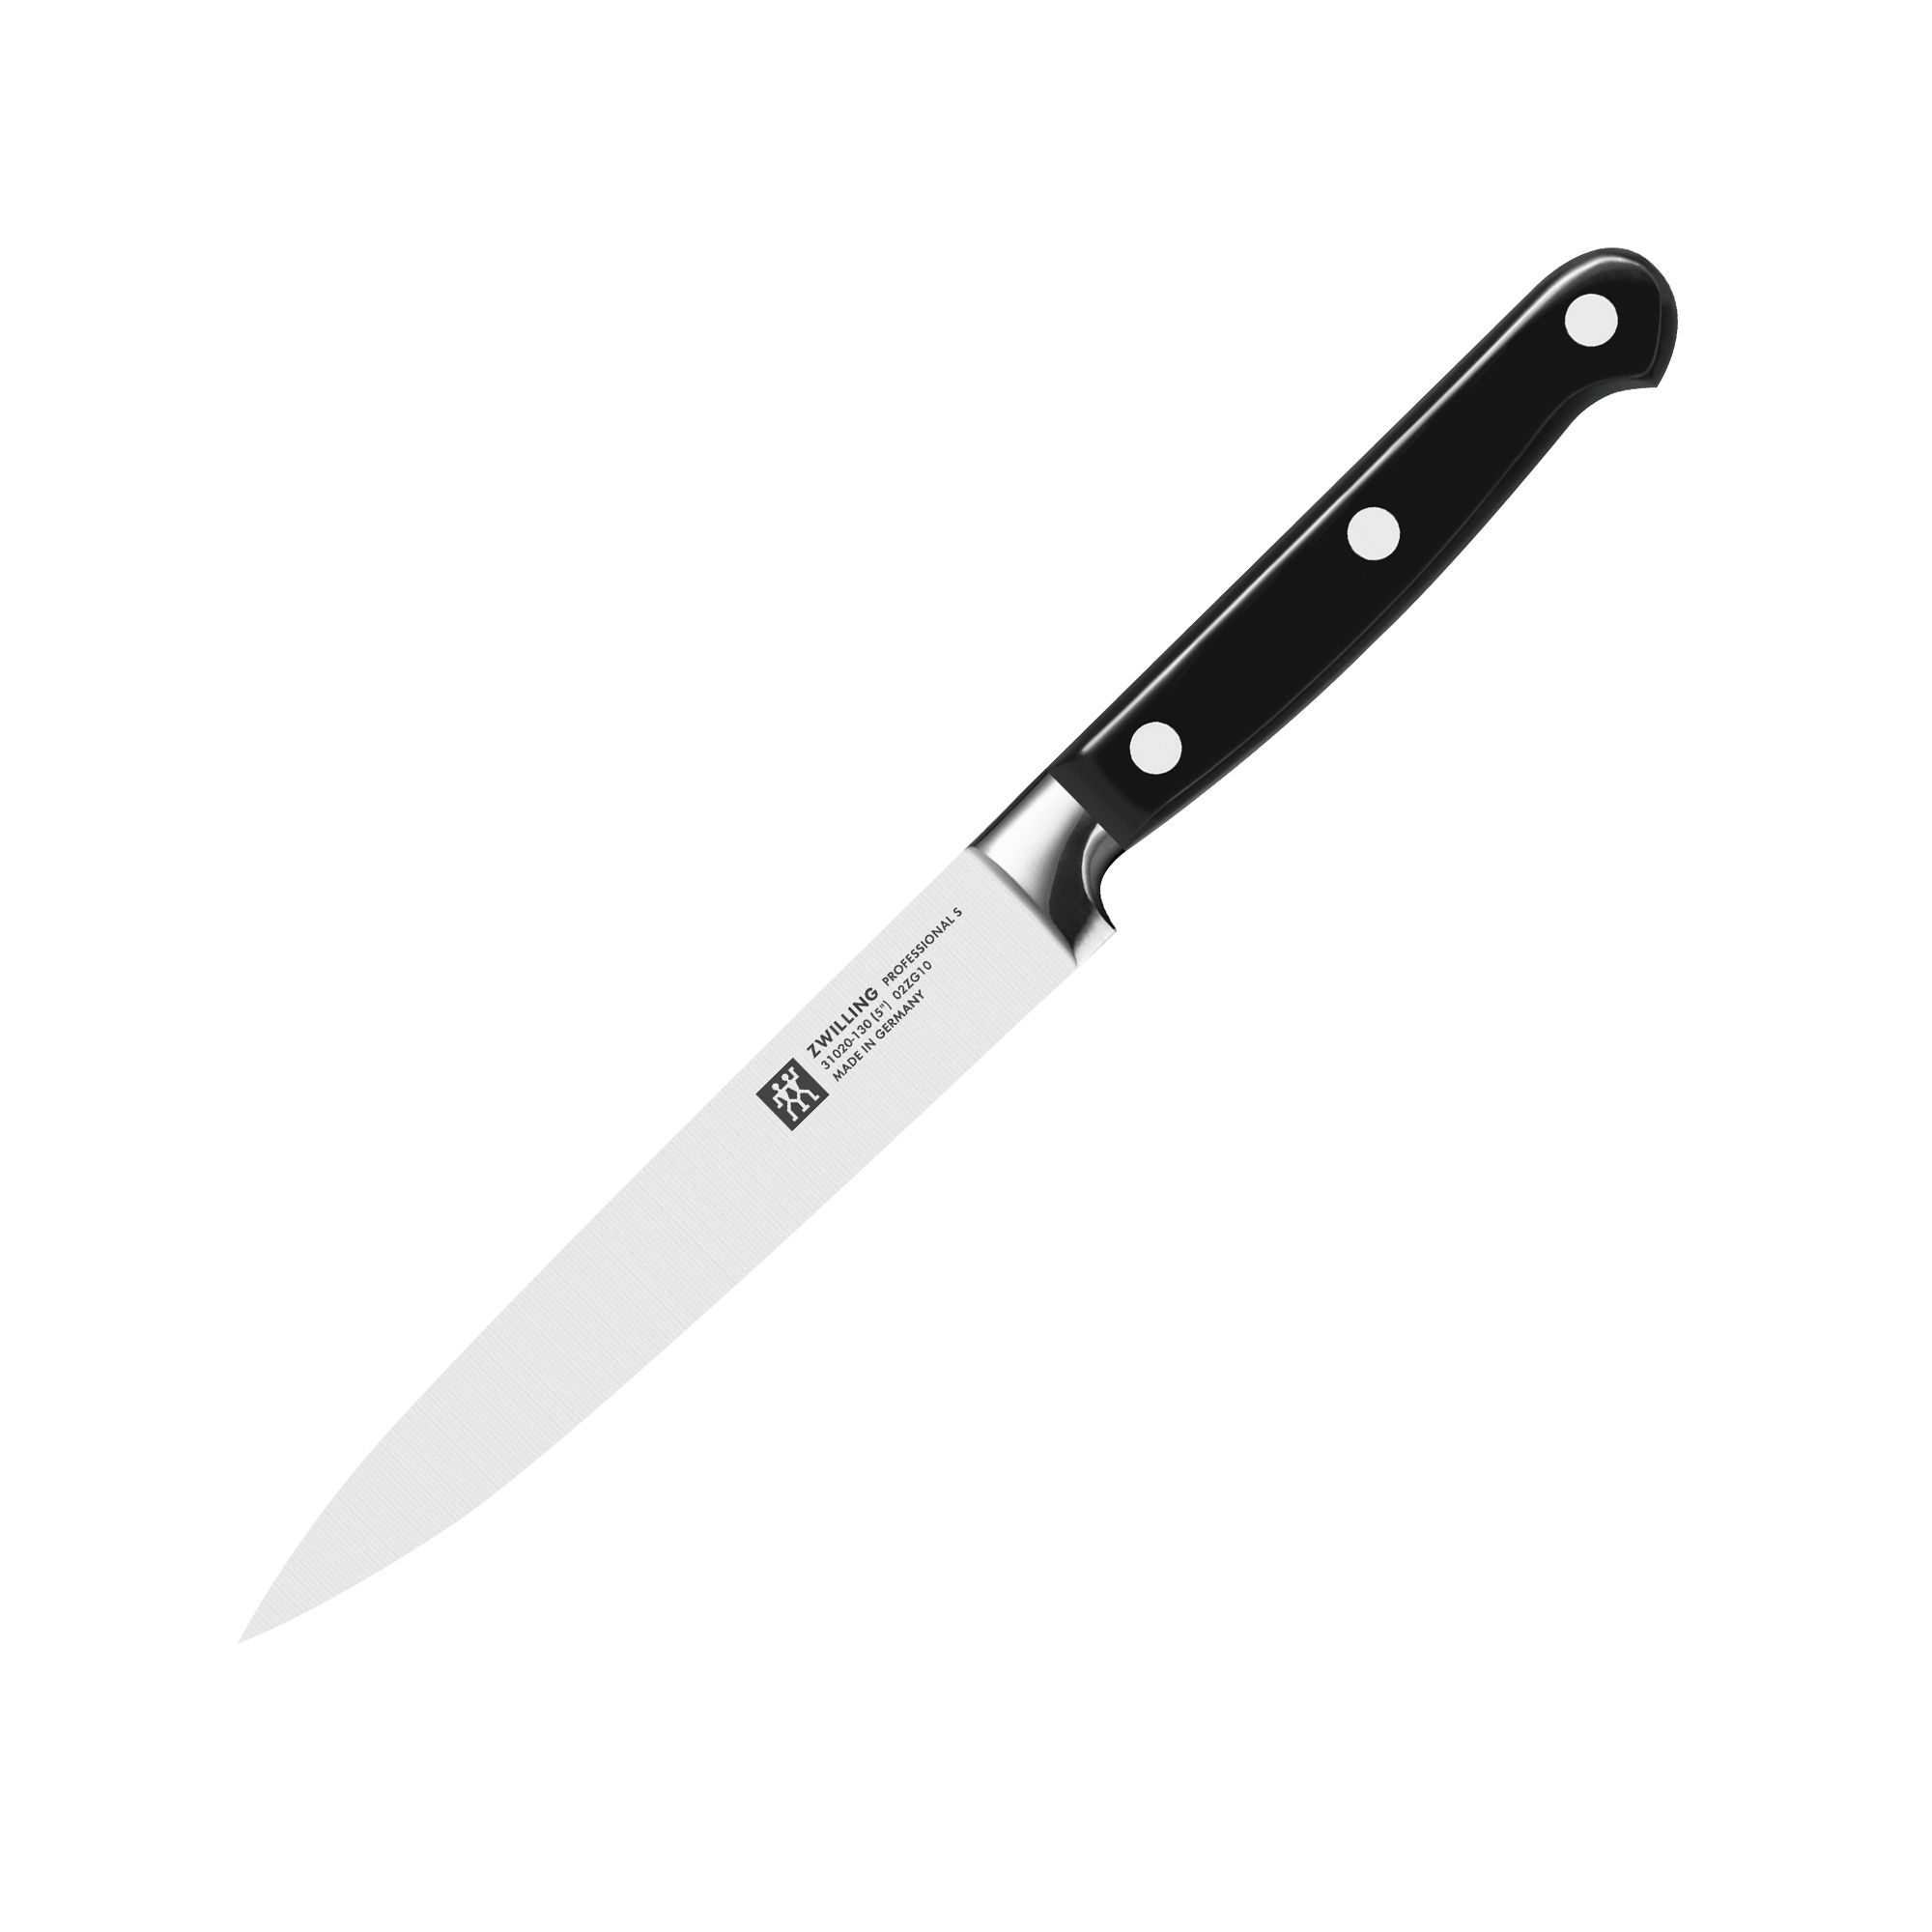 Zwilling - Professional S - Paring knife - 13 cm